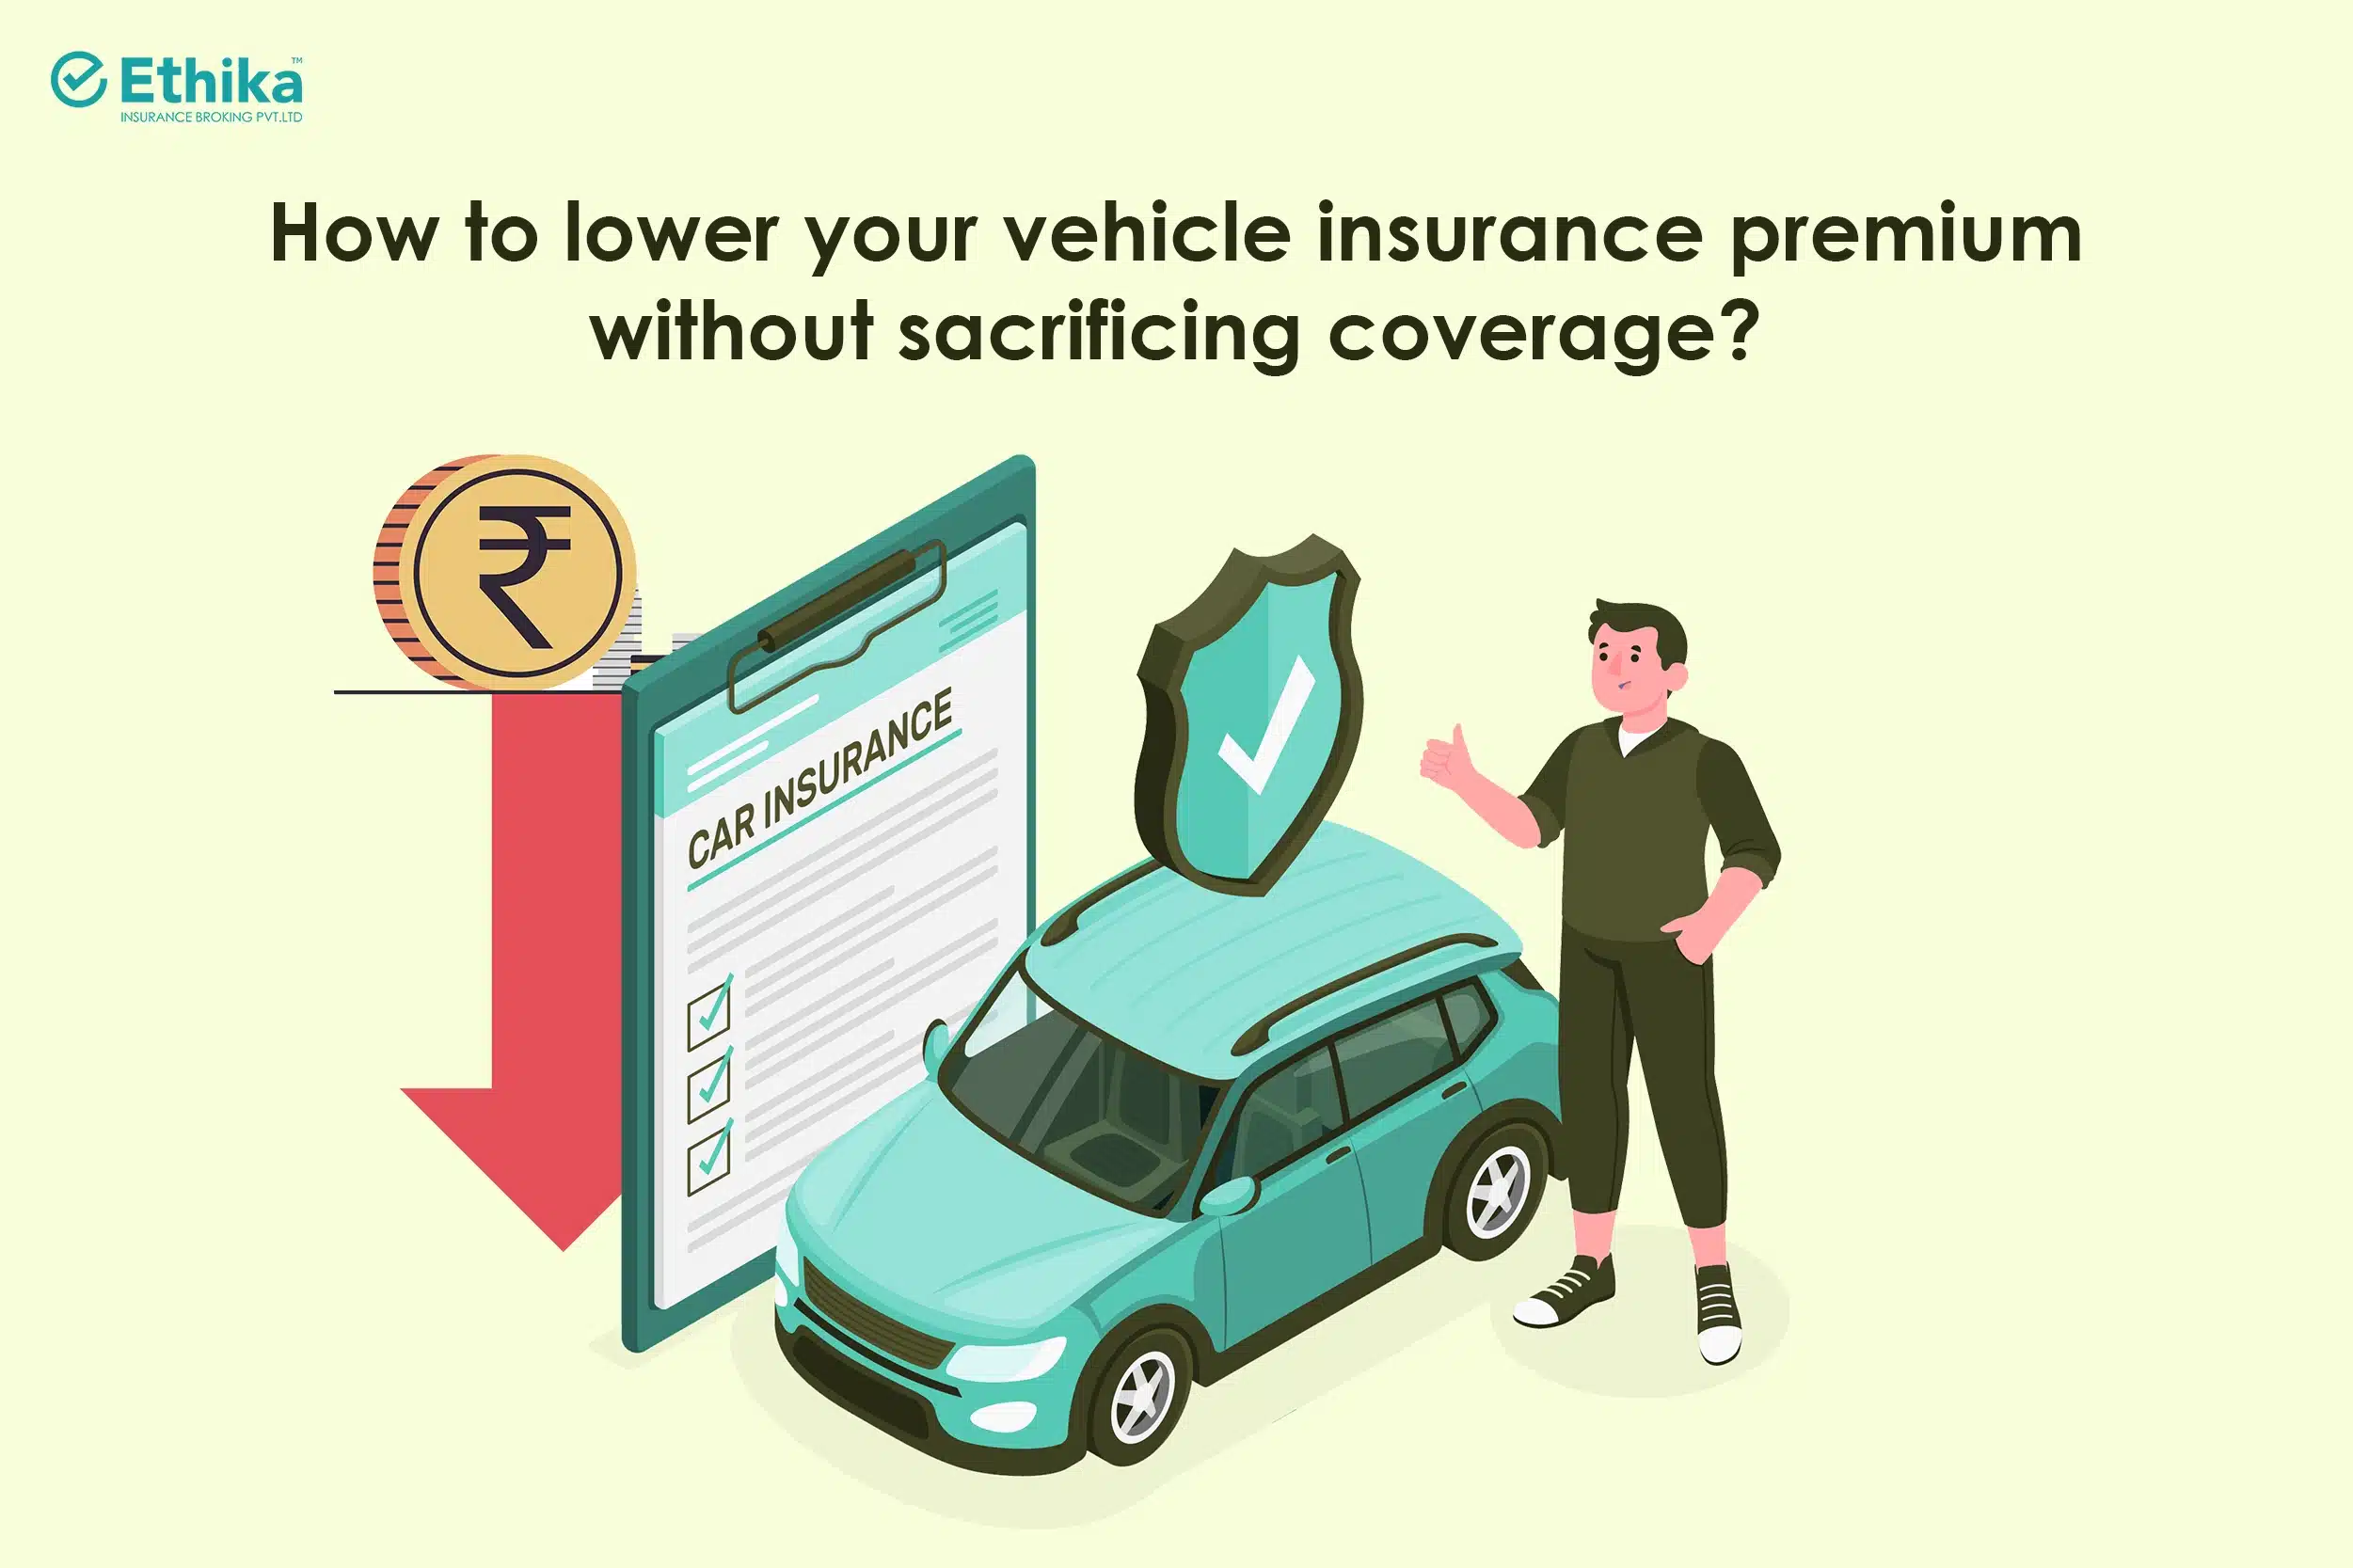 How to Lower Your Vehicle Insurance Premium Without Sacrificing Coverage